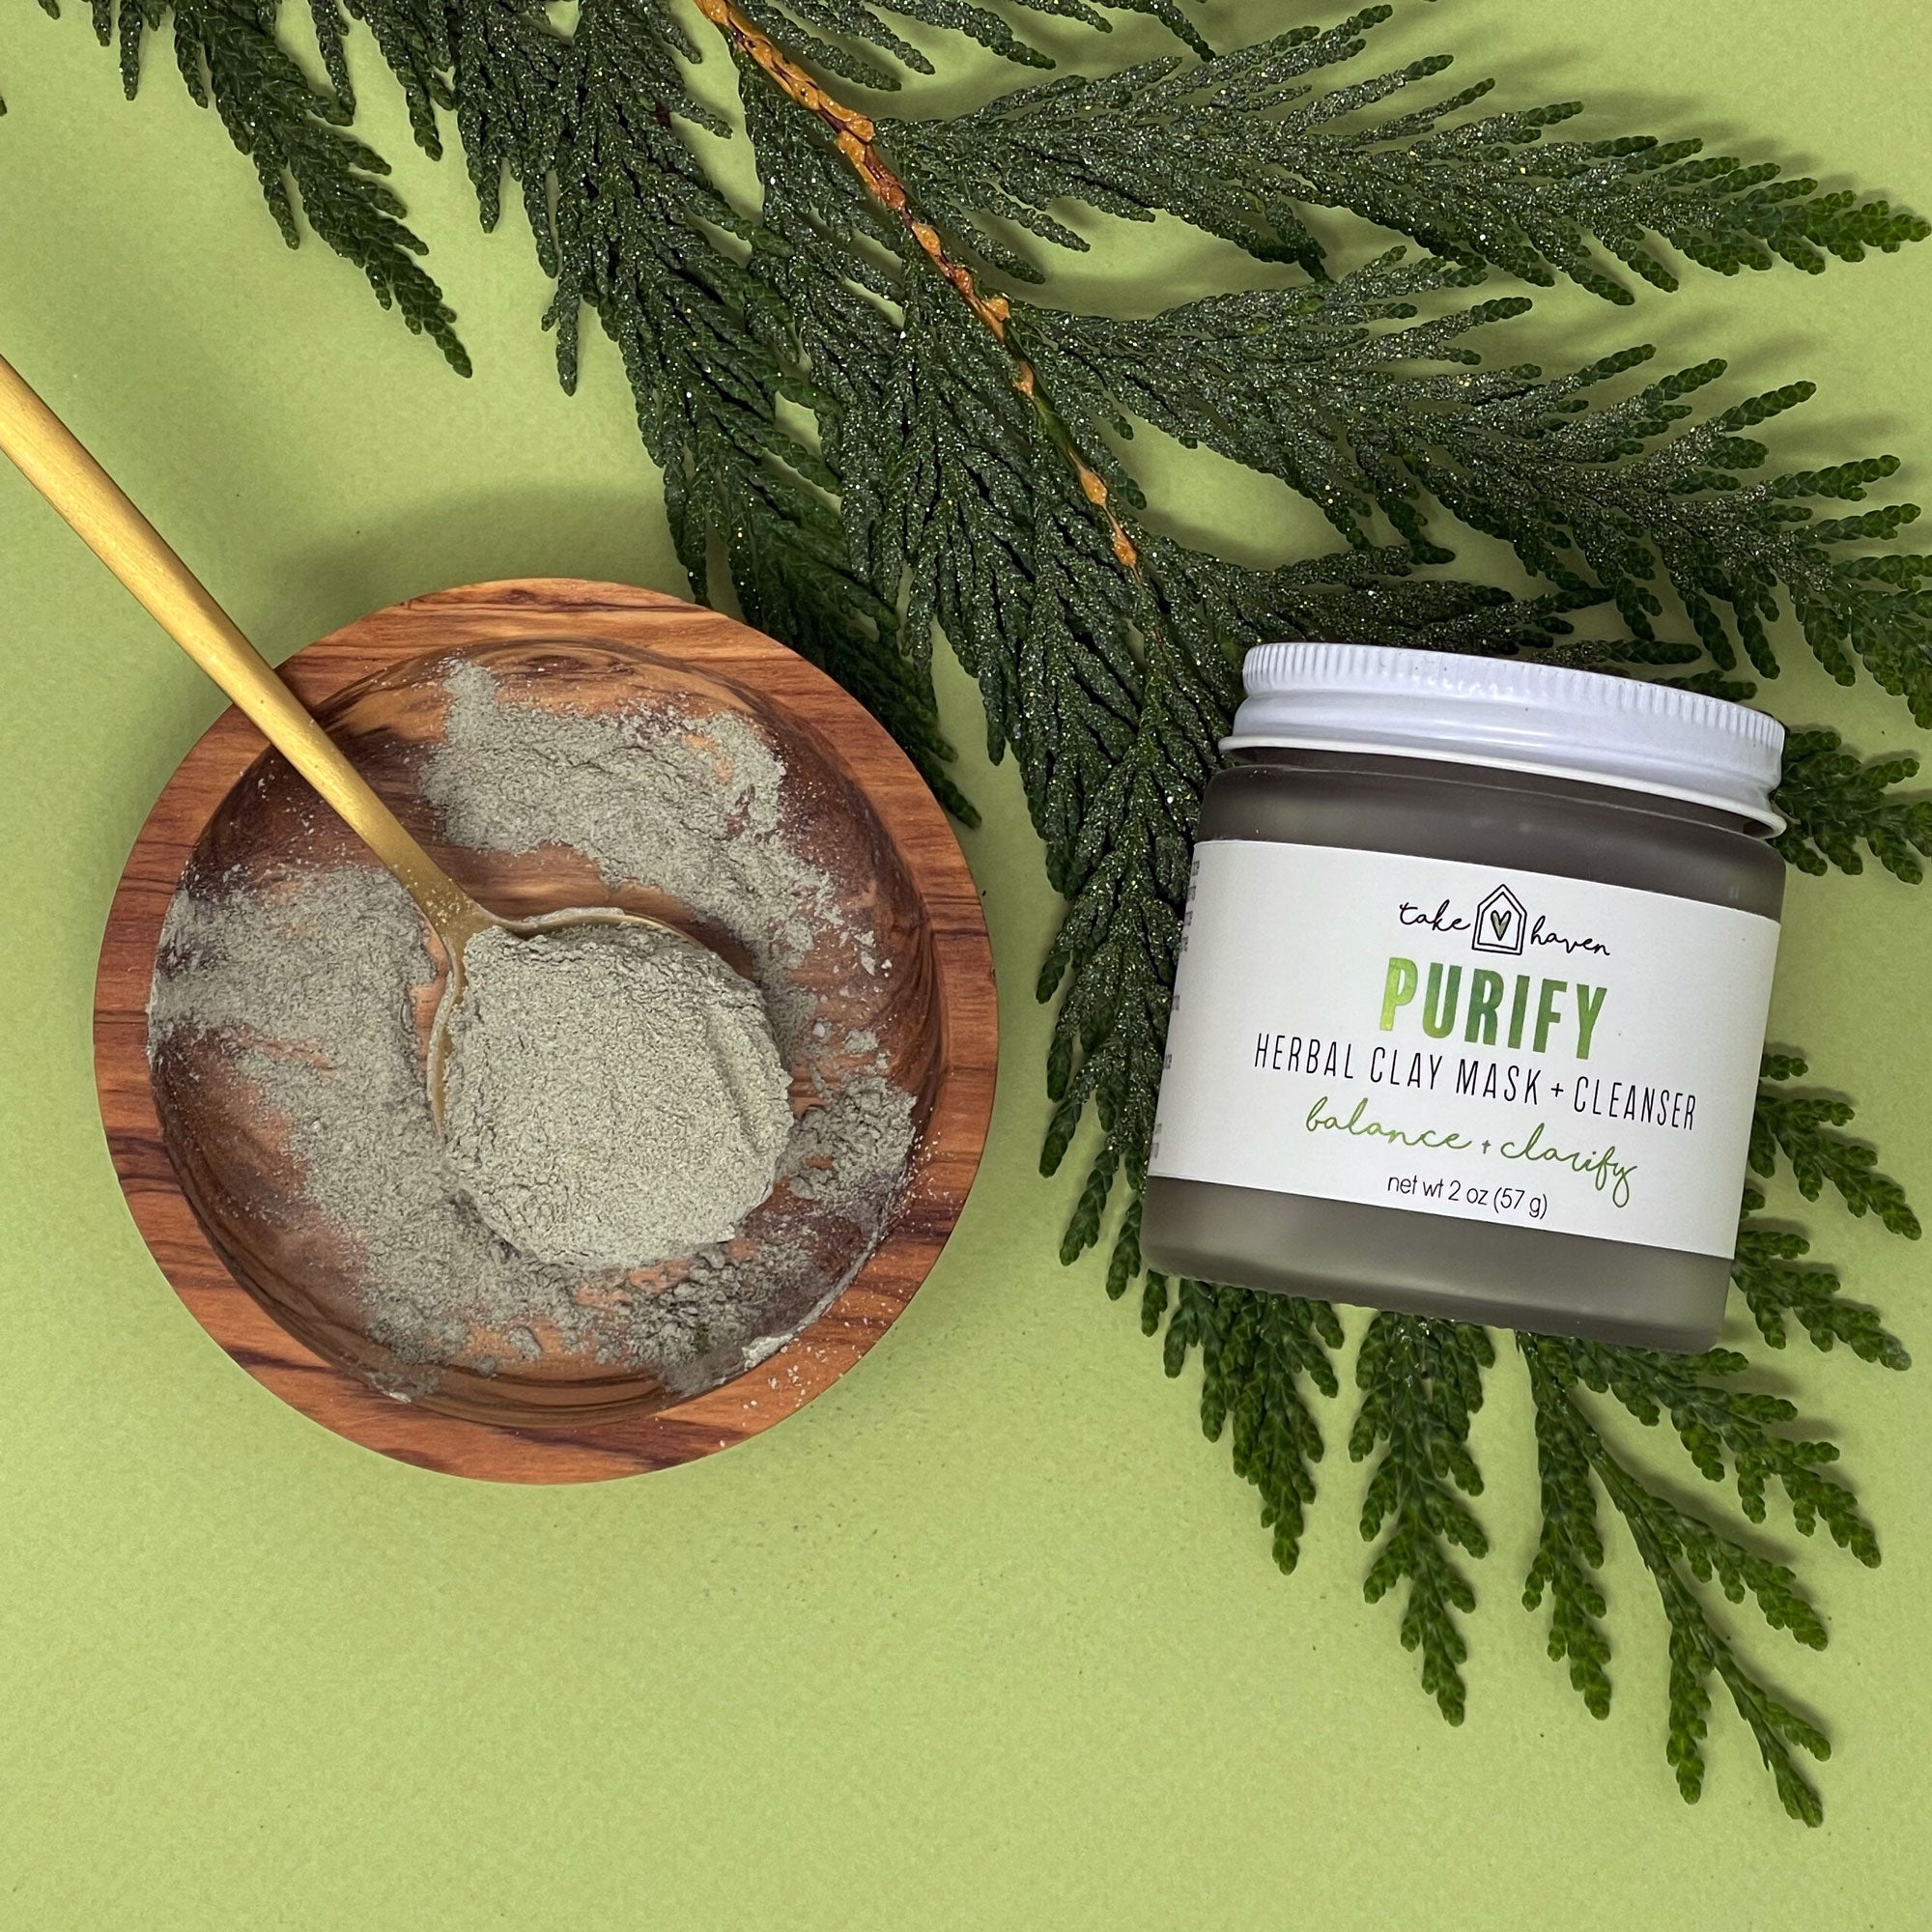 Purify Herbal Clay Mask + Cleanser